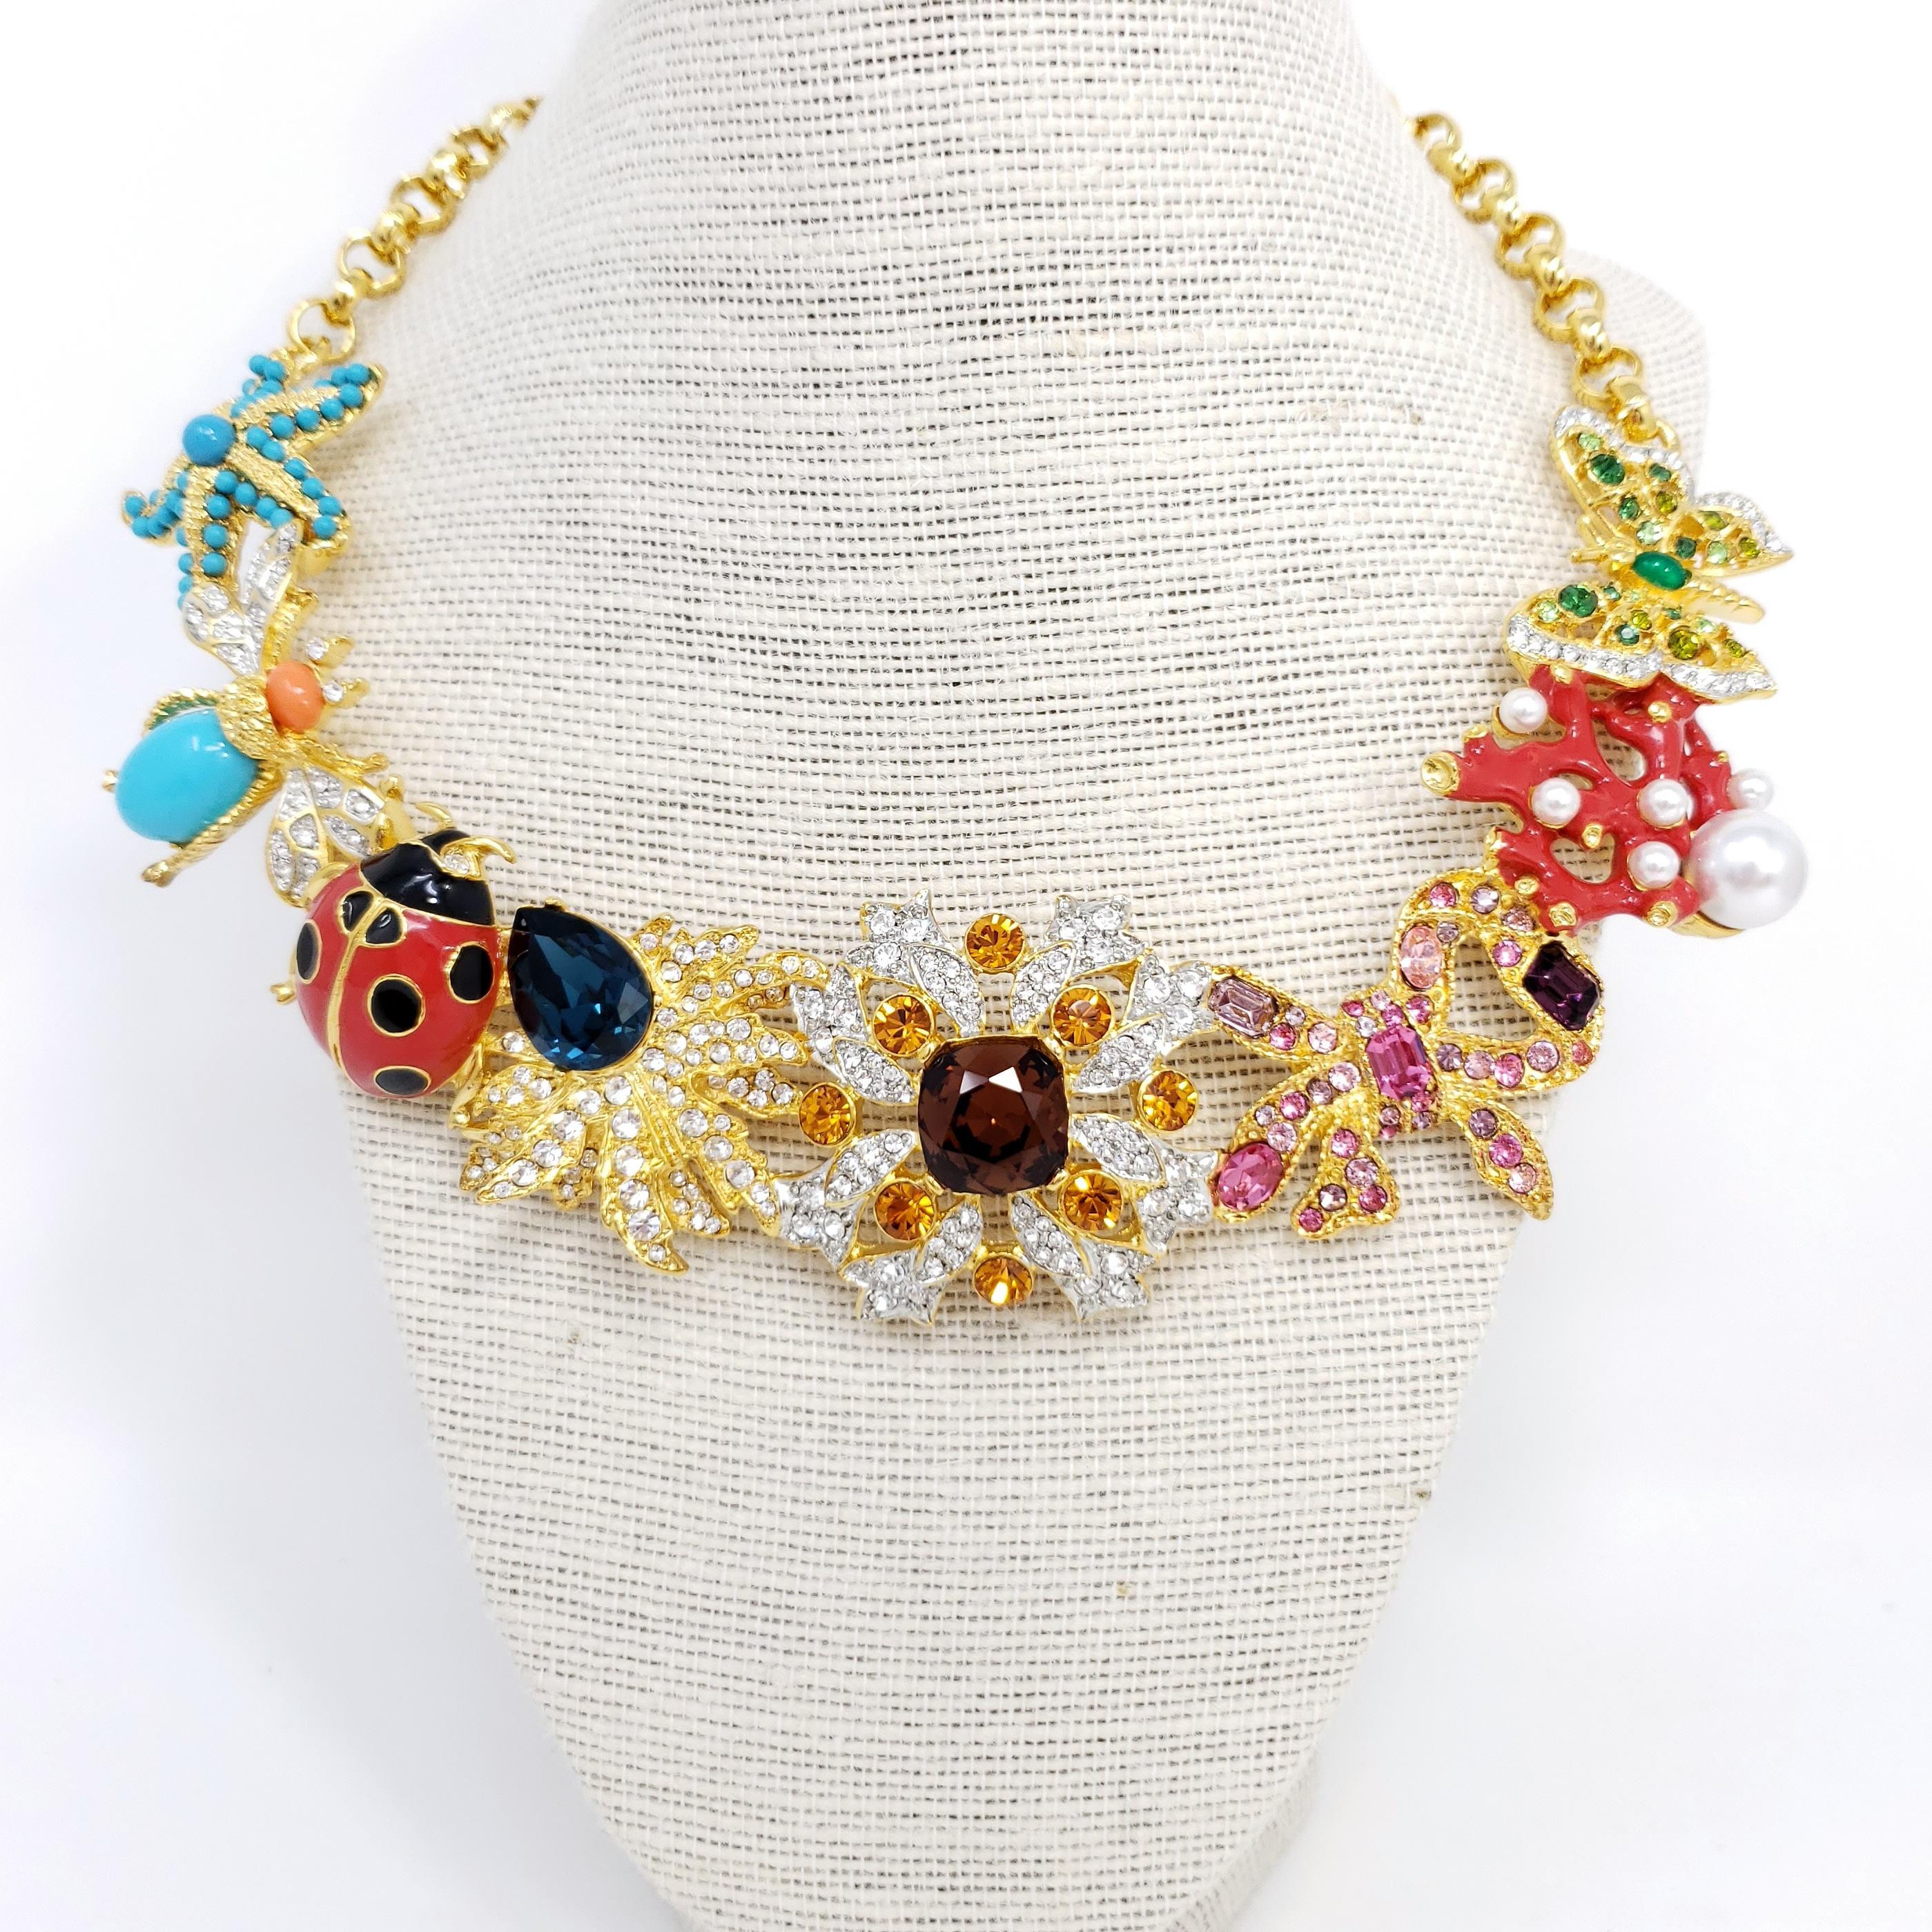 Kaleidoscope necklace by Kenneth Jay Lane. Signature KJL designs linked together to form a dazzling statement necklace! Colorful starfish, fly, ladybug, butterfly, coral, flower, and leaf motifs.

Features faux pearls, painted enamel, cabochons and